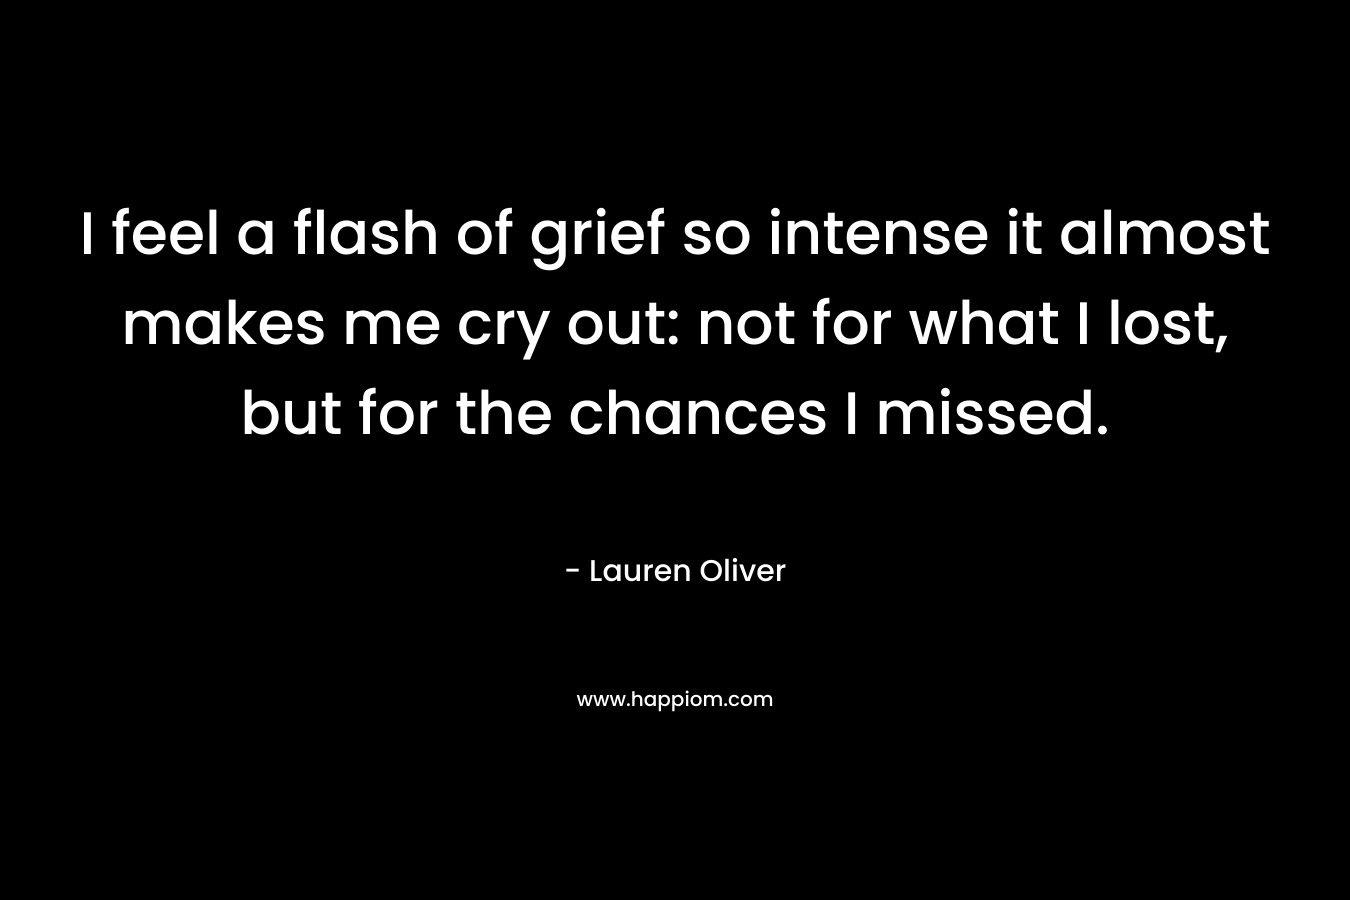 I feel a flash of grief so intense it almost makes me cry out: not for what I lost, but for the chances I missed. – Lauren Oliver